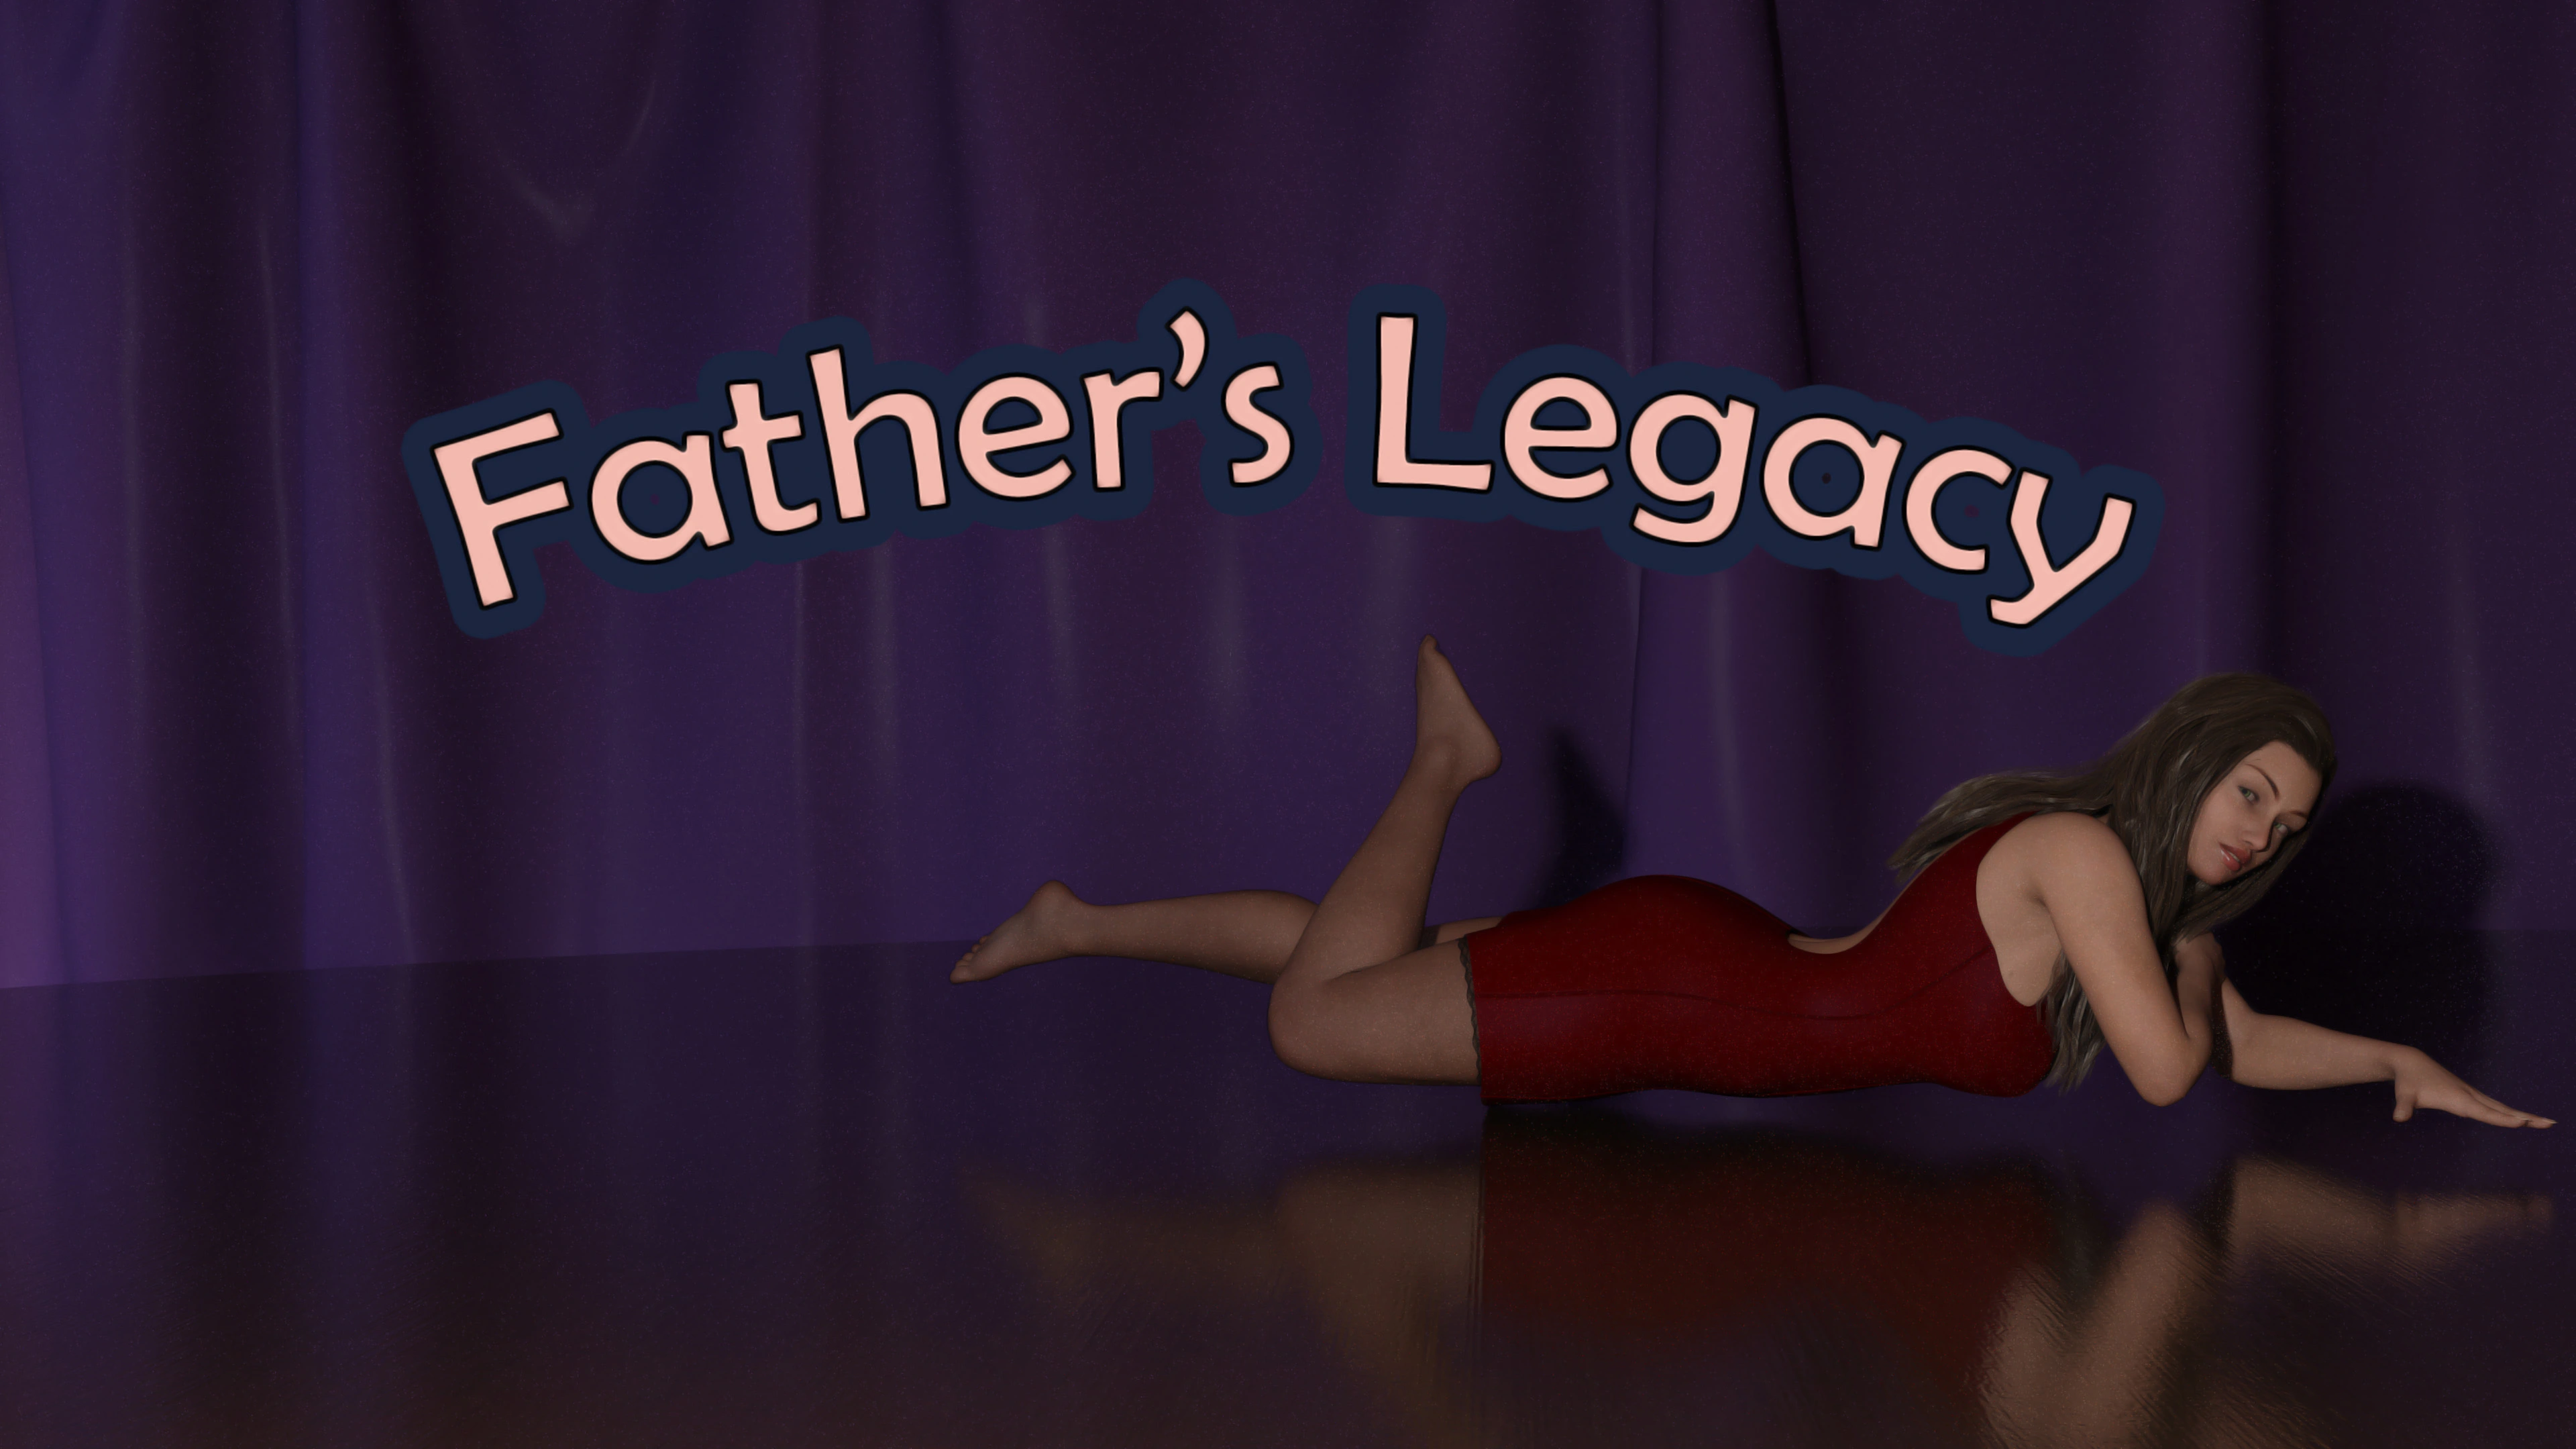 Father's Legacy [v0.2] main image